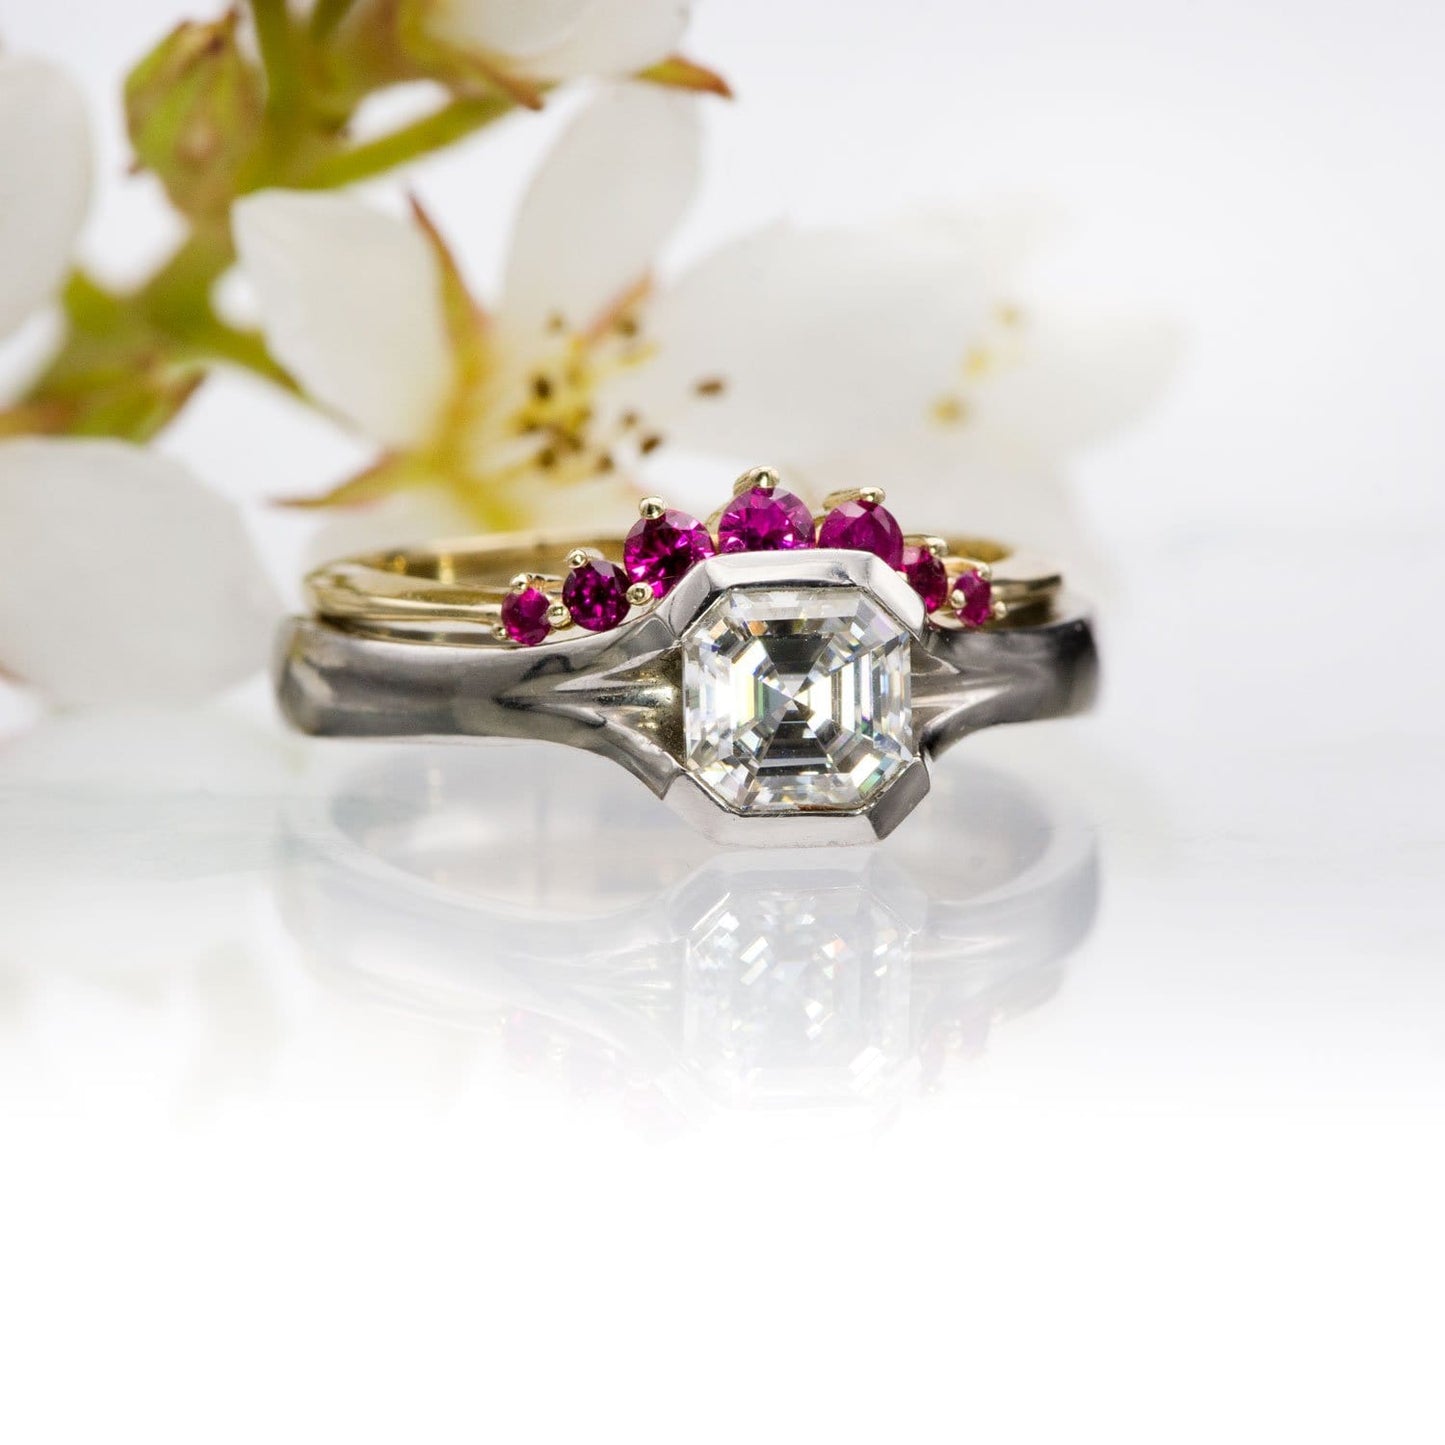 Corinne - Curved Contoured Wedding Ring With Rubies Ring by Nodeform